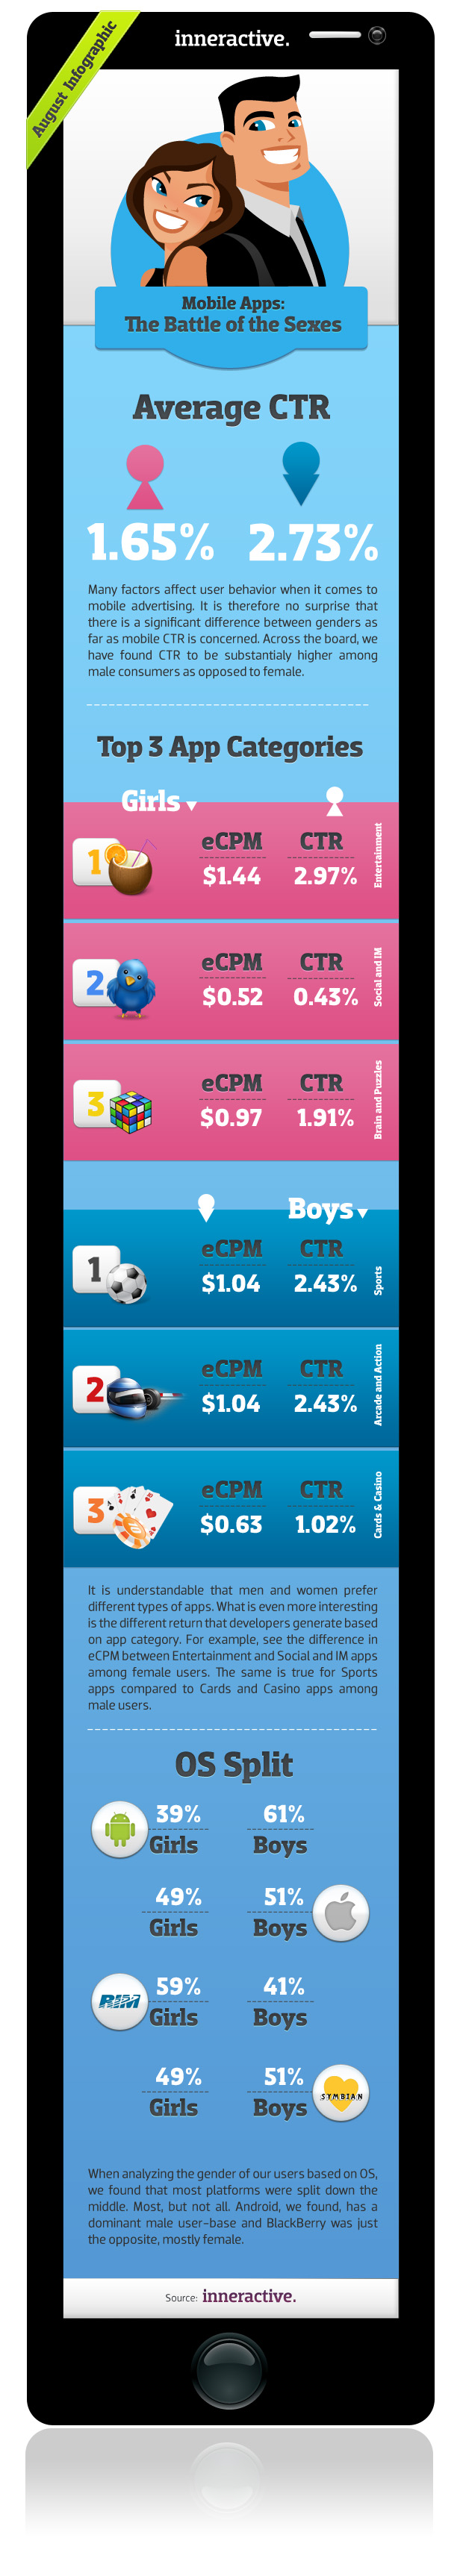 Mobile Apps: The Battle of The Sexes